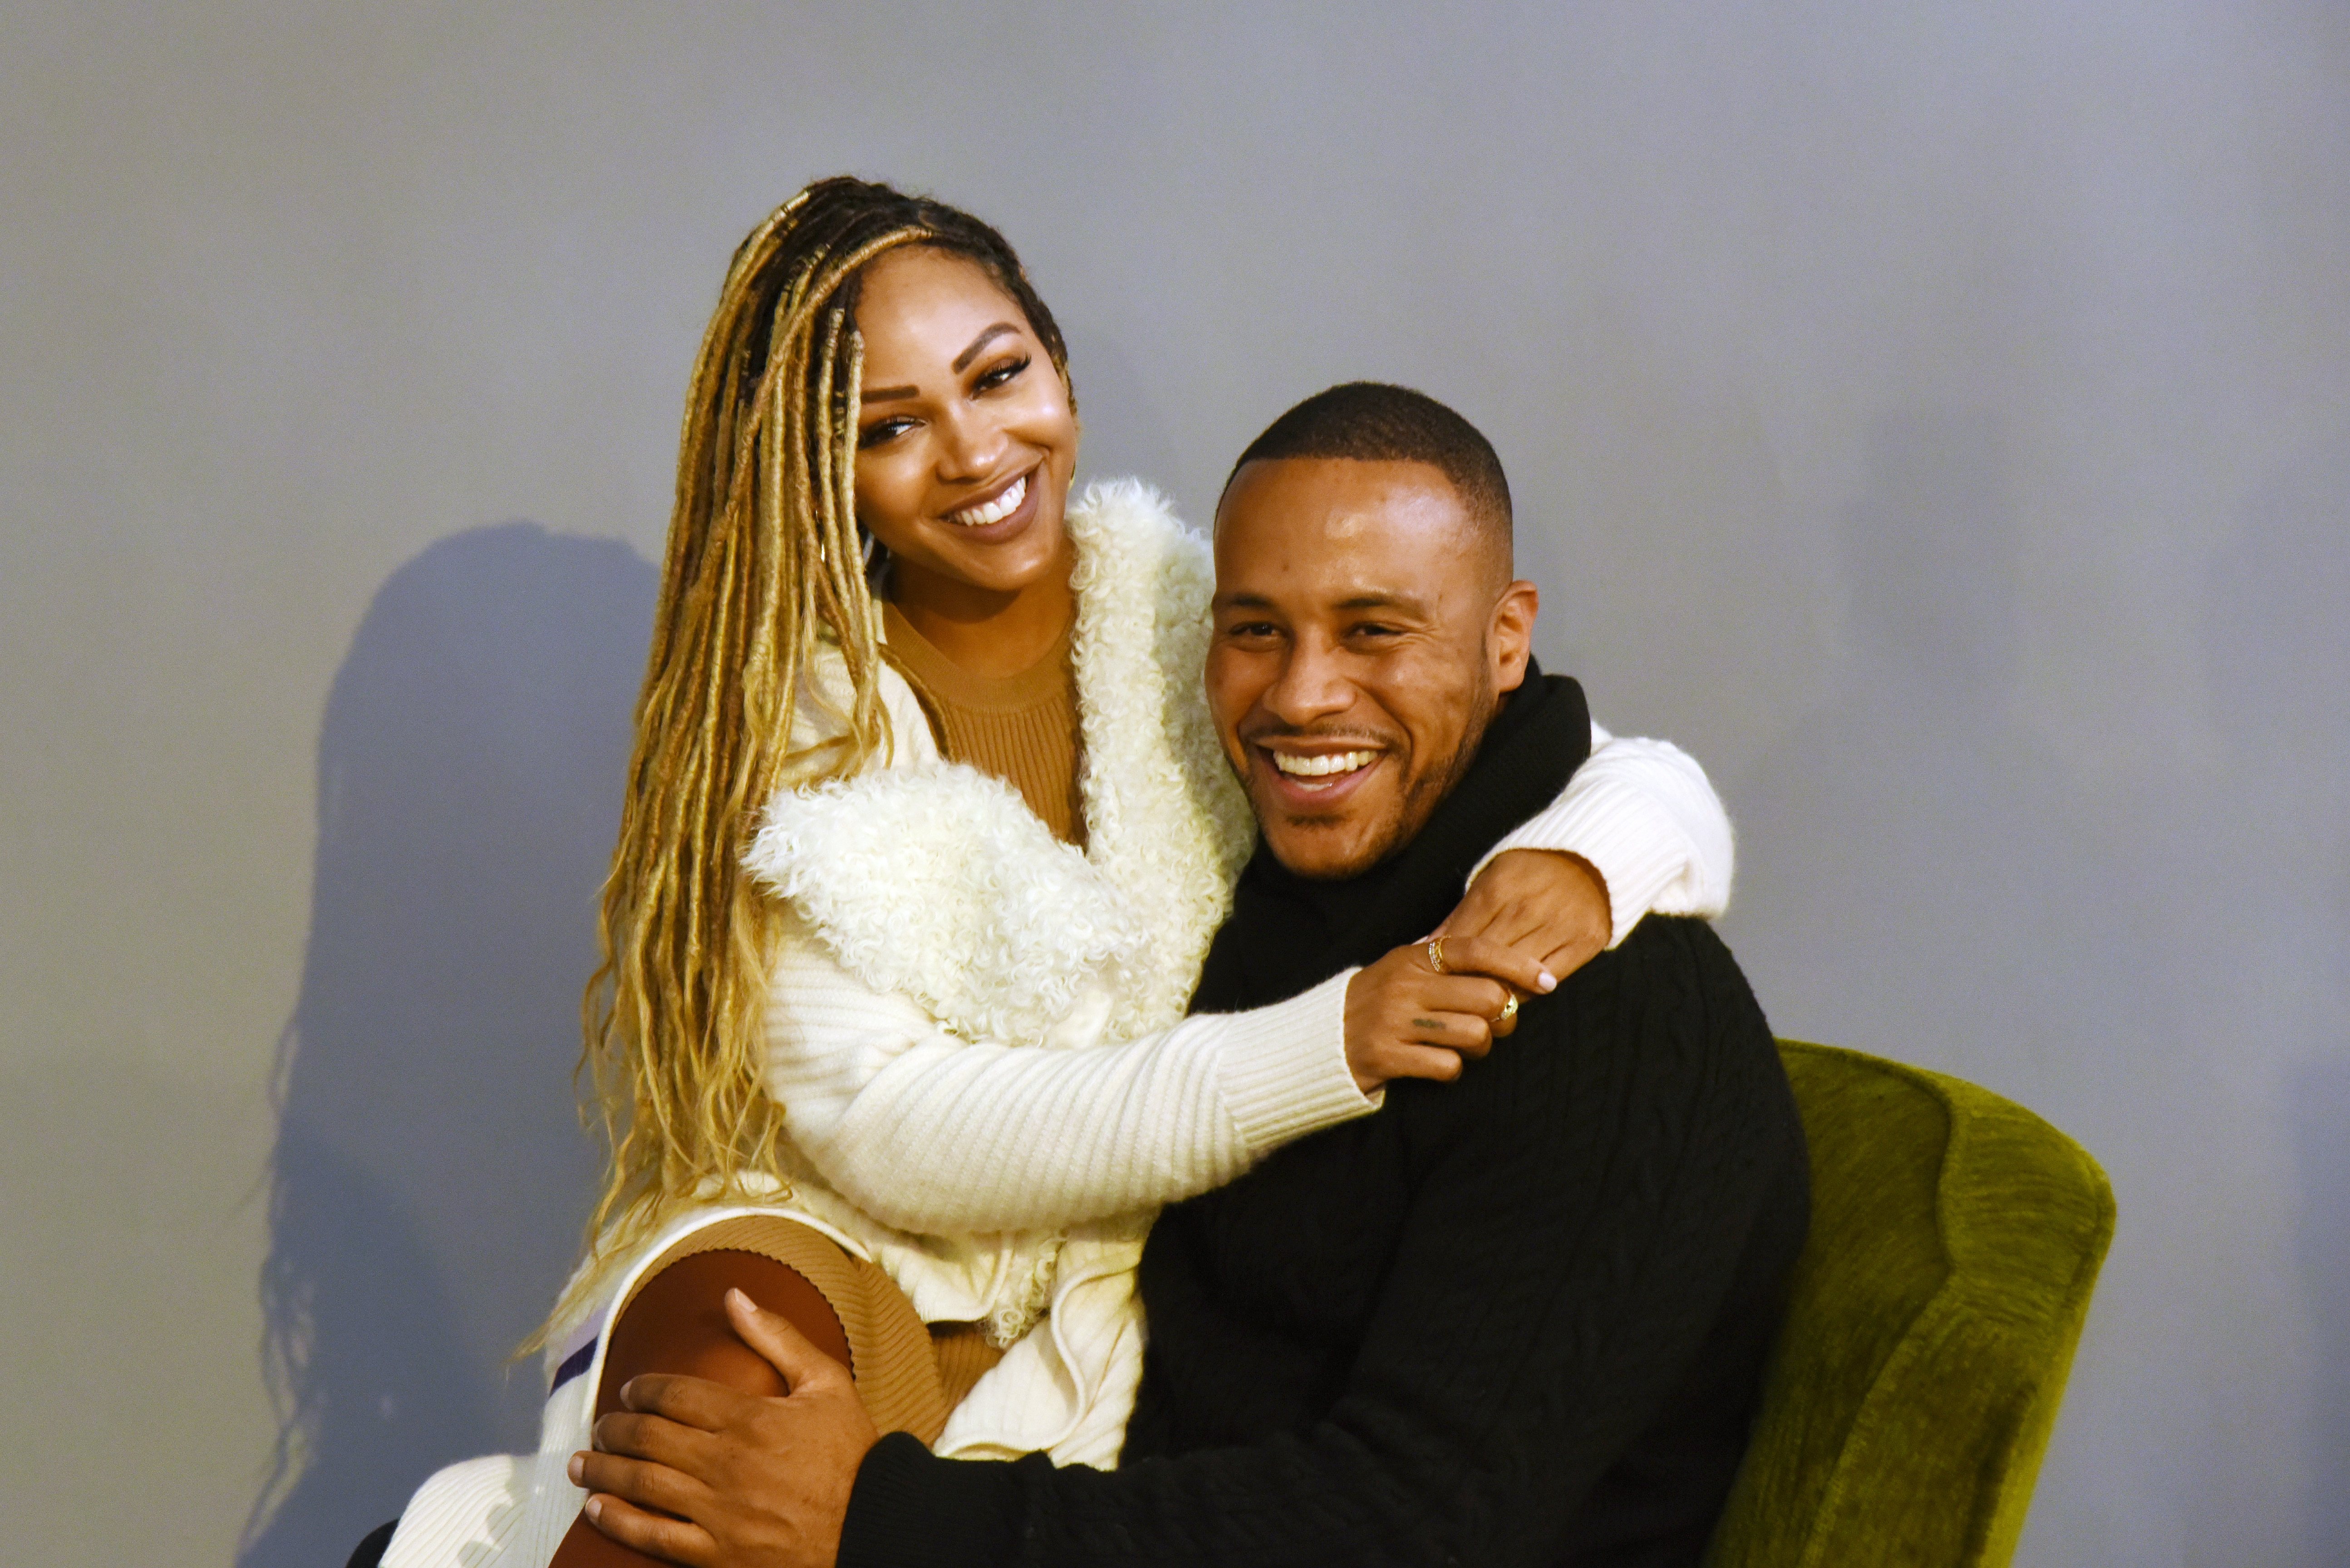 Meagan Good and DeVon Franklin at the 2018 Sundance Film Festival at Buona Vita on January 21, 2018, in Park City, Utah. | Source: Getty Images